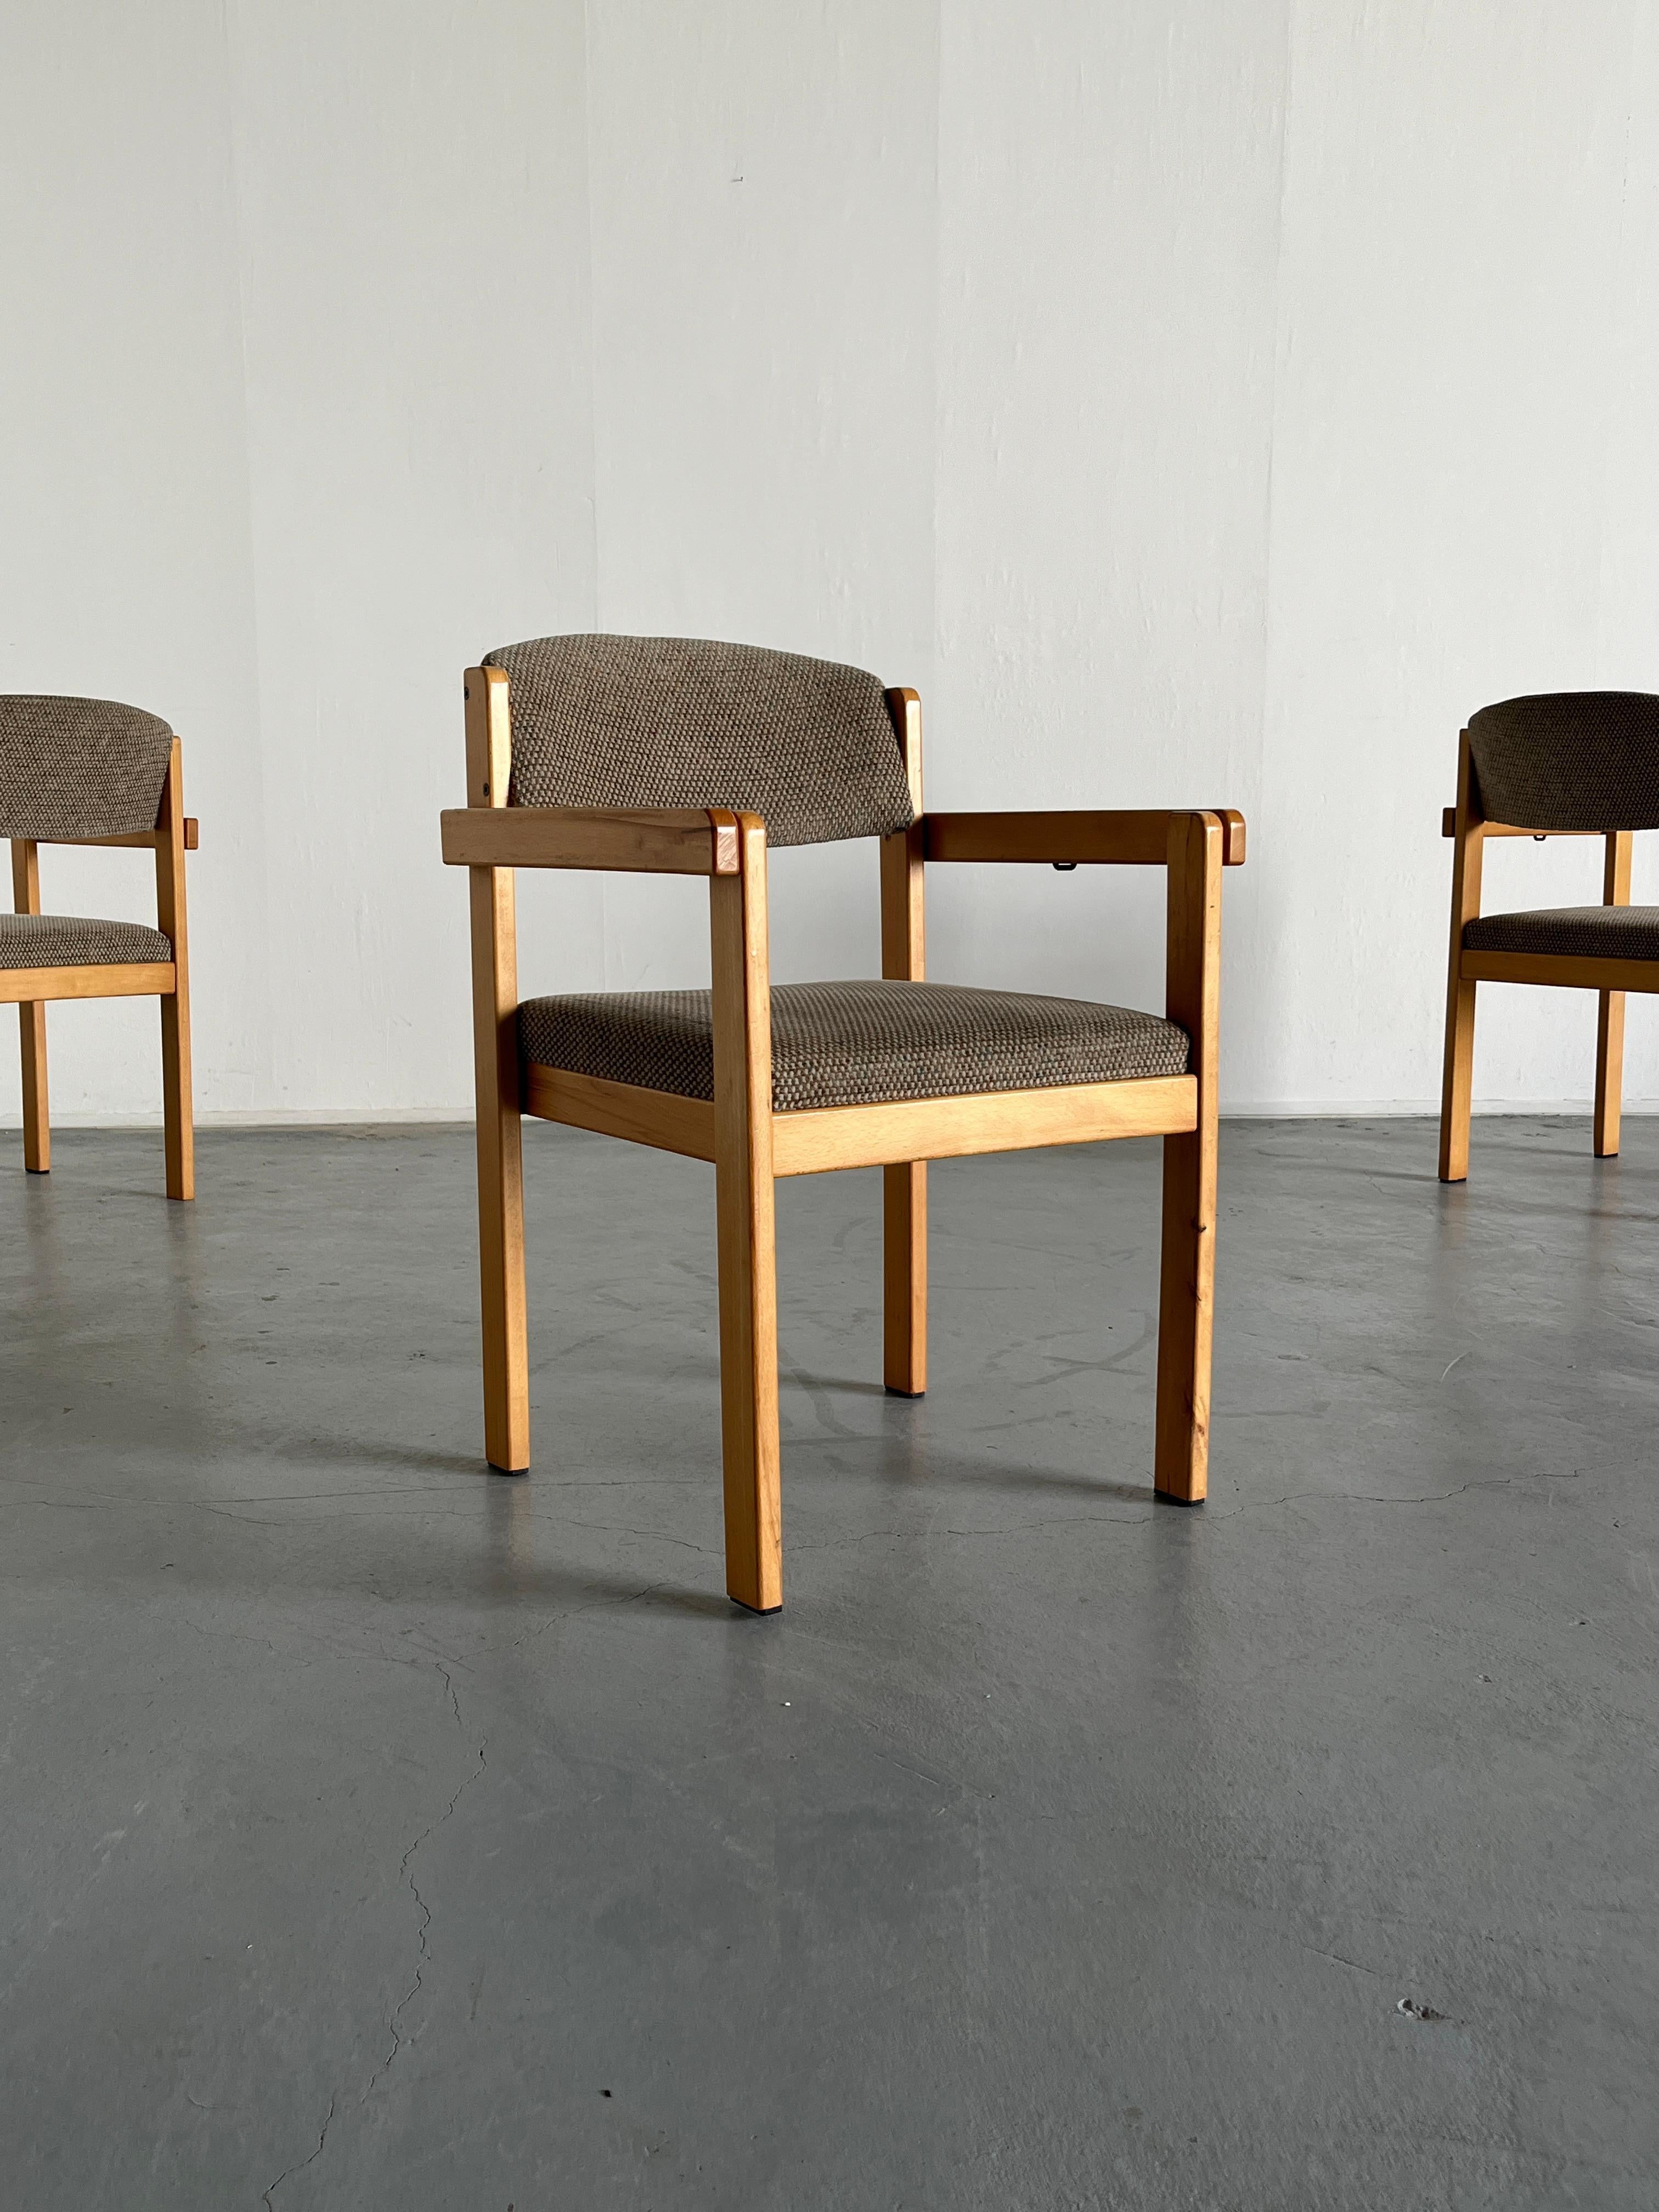 Scandinavian Mid-Century Modern stackable dining chairs or side armchairs in solid wood and amazing grey knitted upholstery, with shades of green and brown. 
Can be connected to create a seating bench 
High production quality.

Original vintage